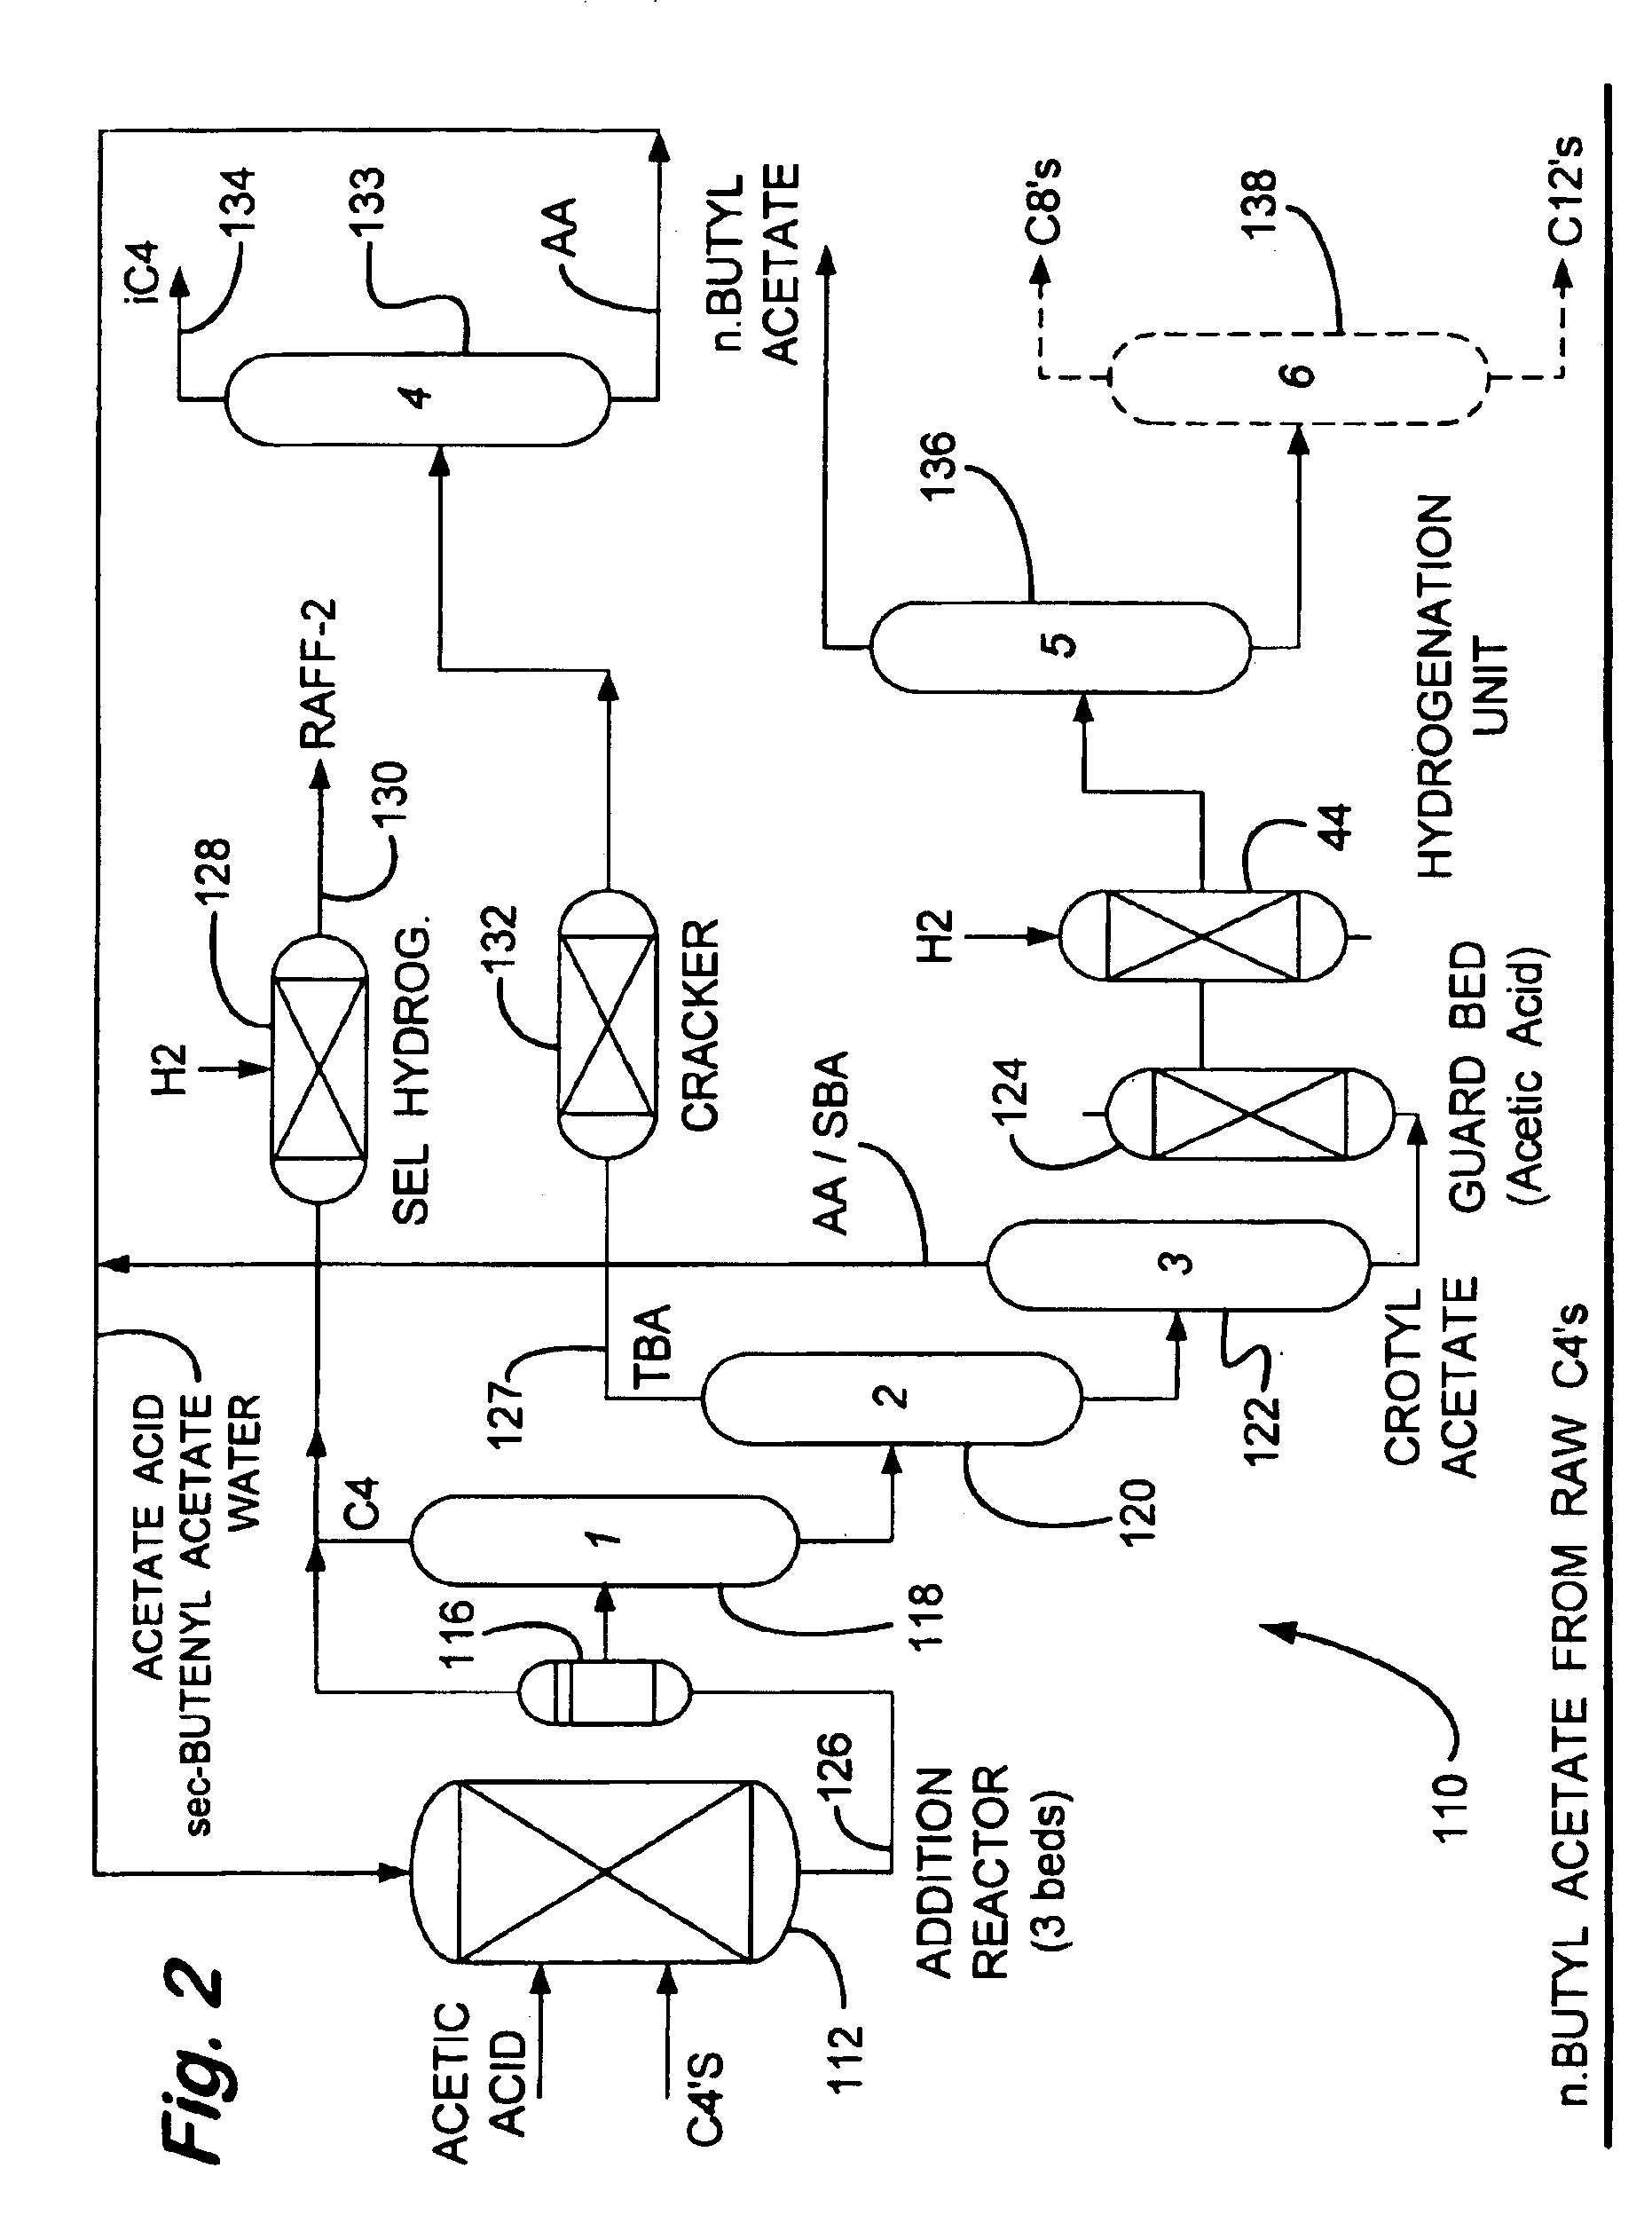 Process for making n-butyl esters from butadiene